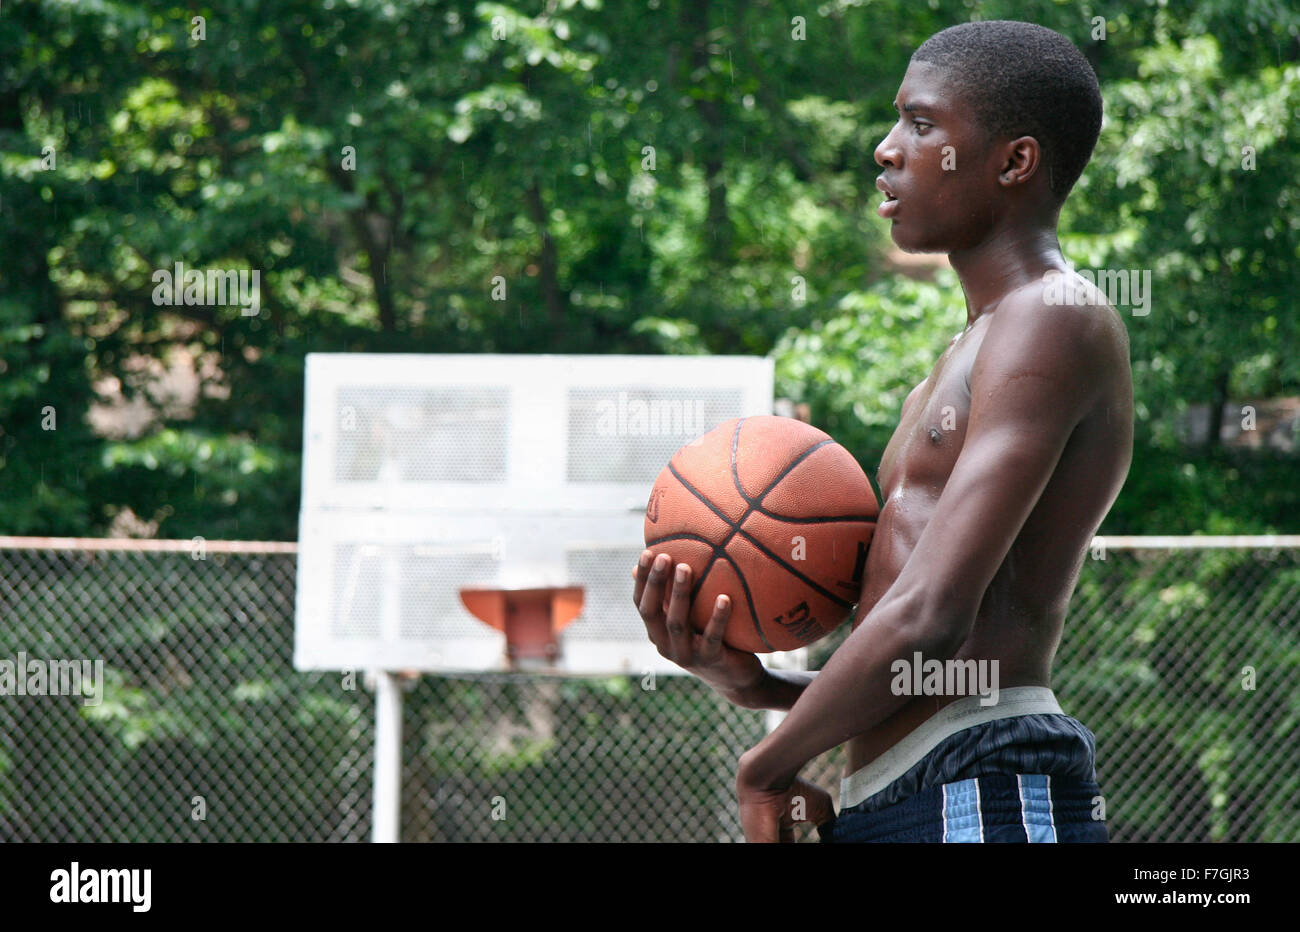 NEW YORK CITY - JUNE 22: Two black boys playing in one Harlem basketball court, chain-link fence boxes, seen on June 22, 2008 in Stock Photo